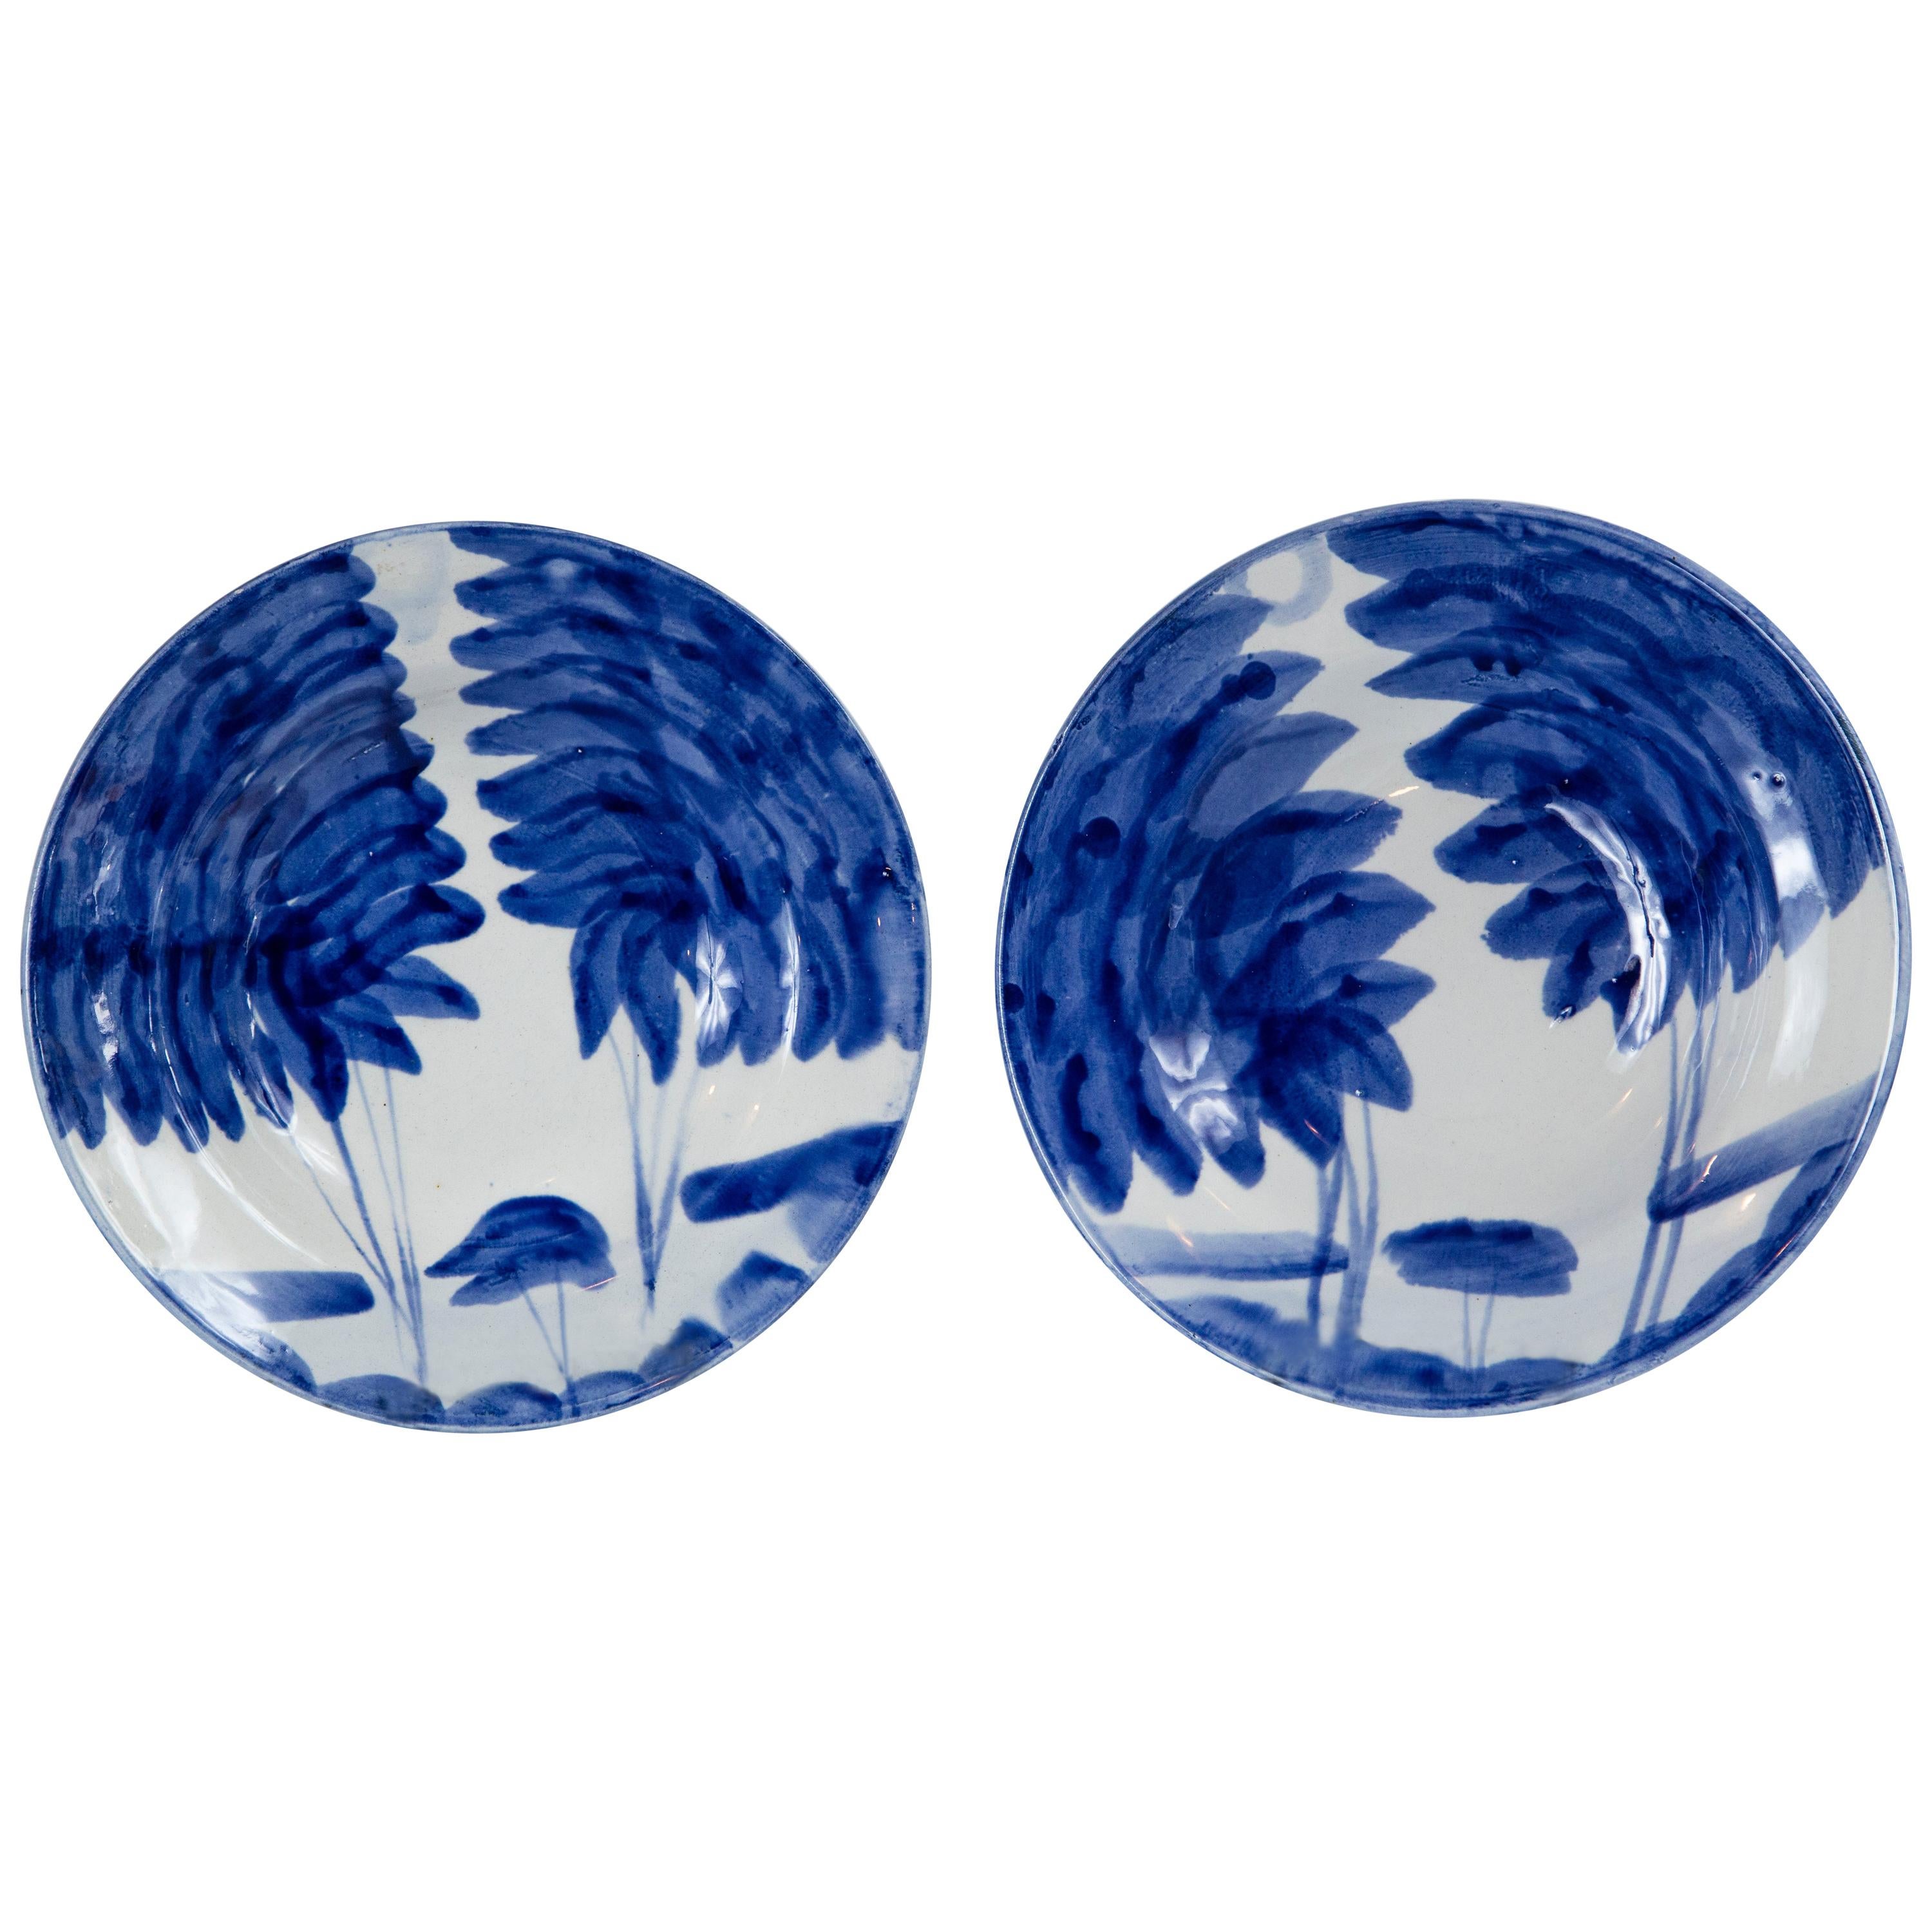 Pair of Hand Painted Blue and White Ceramic Bowls, Europe, Mid-20th Century